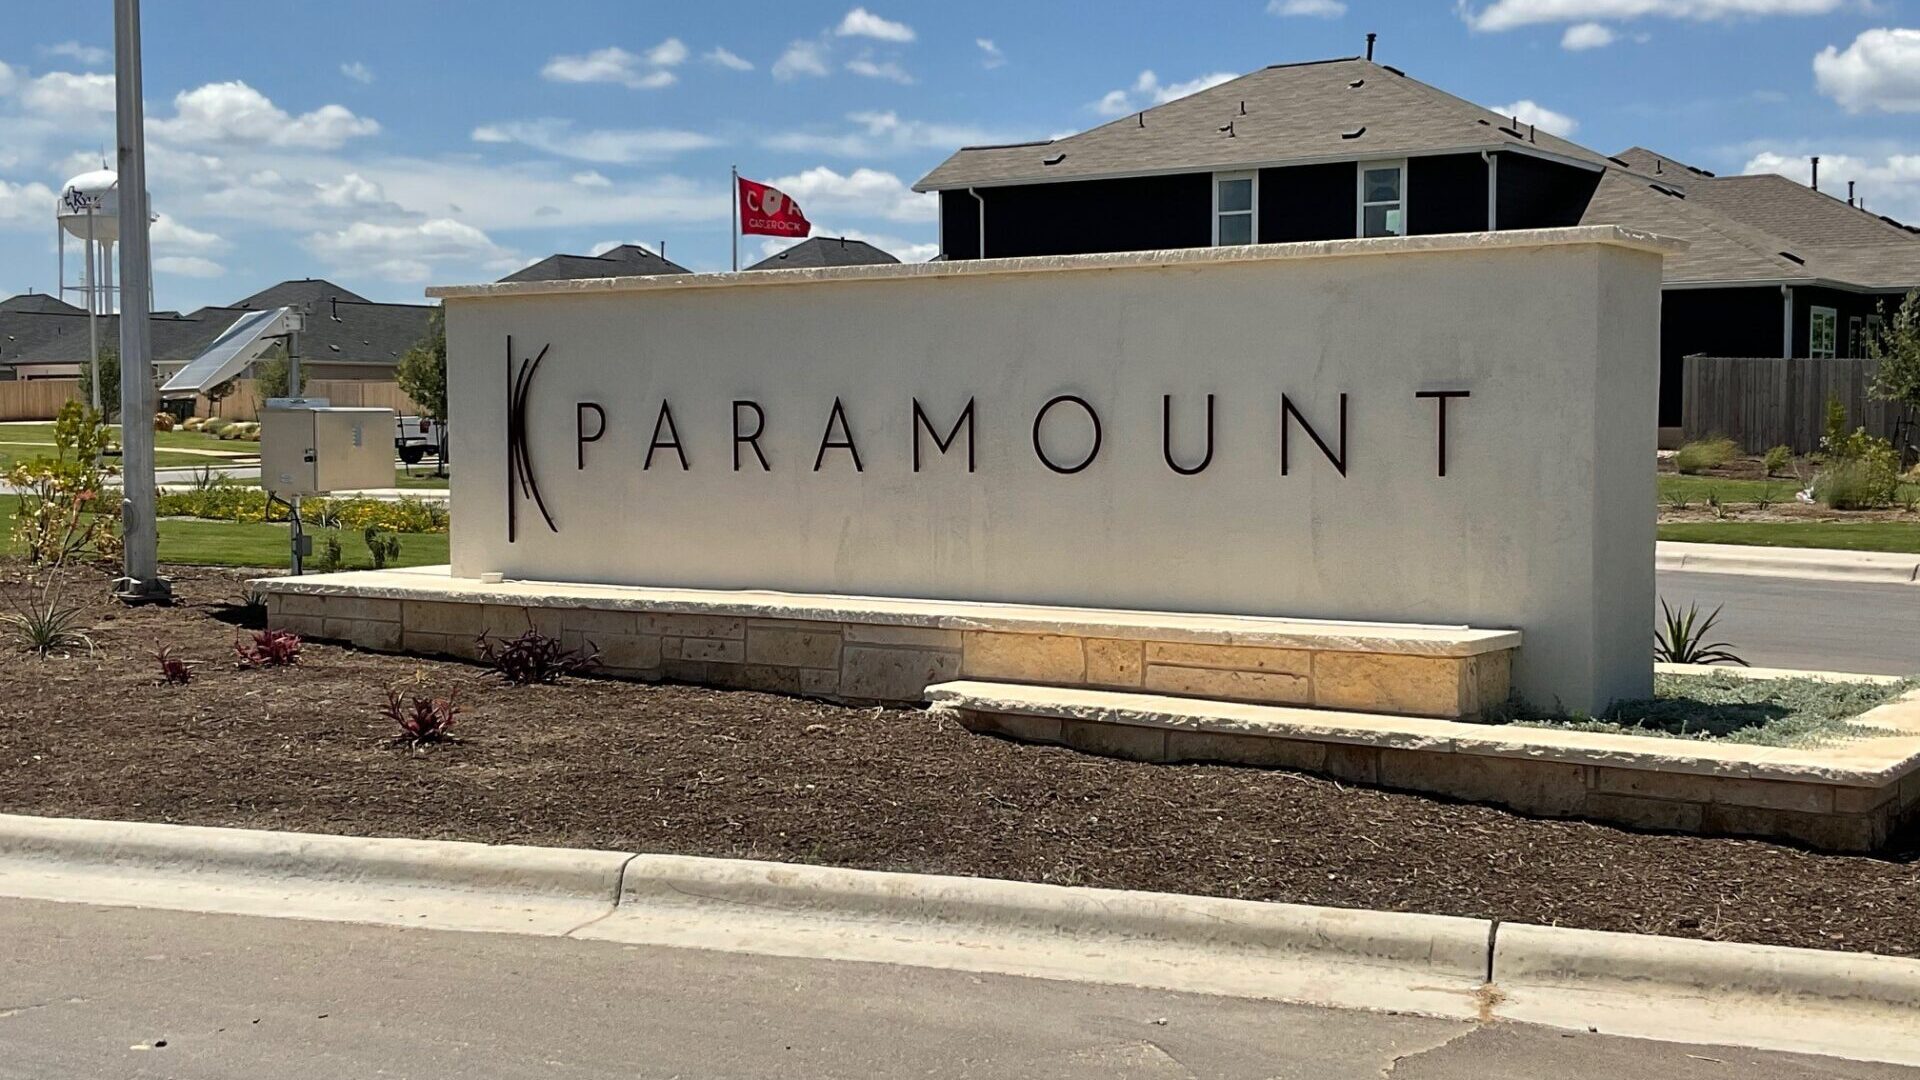  Paramount - COMING SOON! New Homes in Kyle 